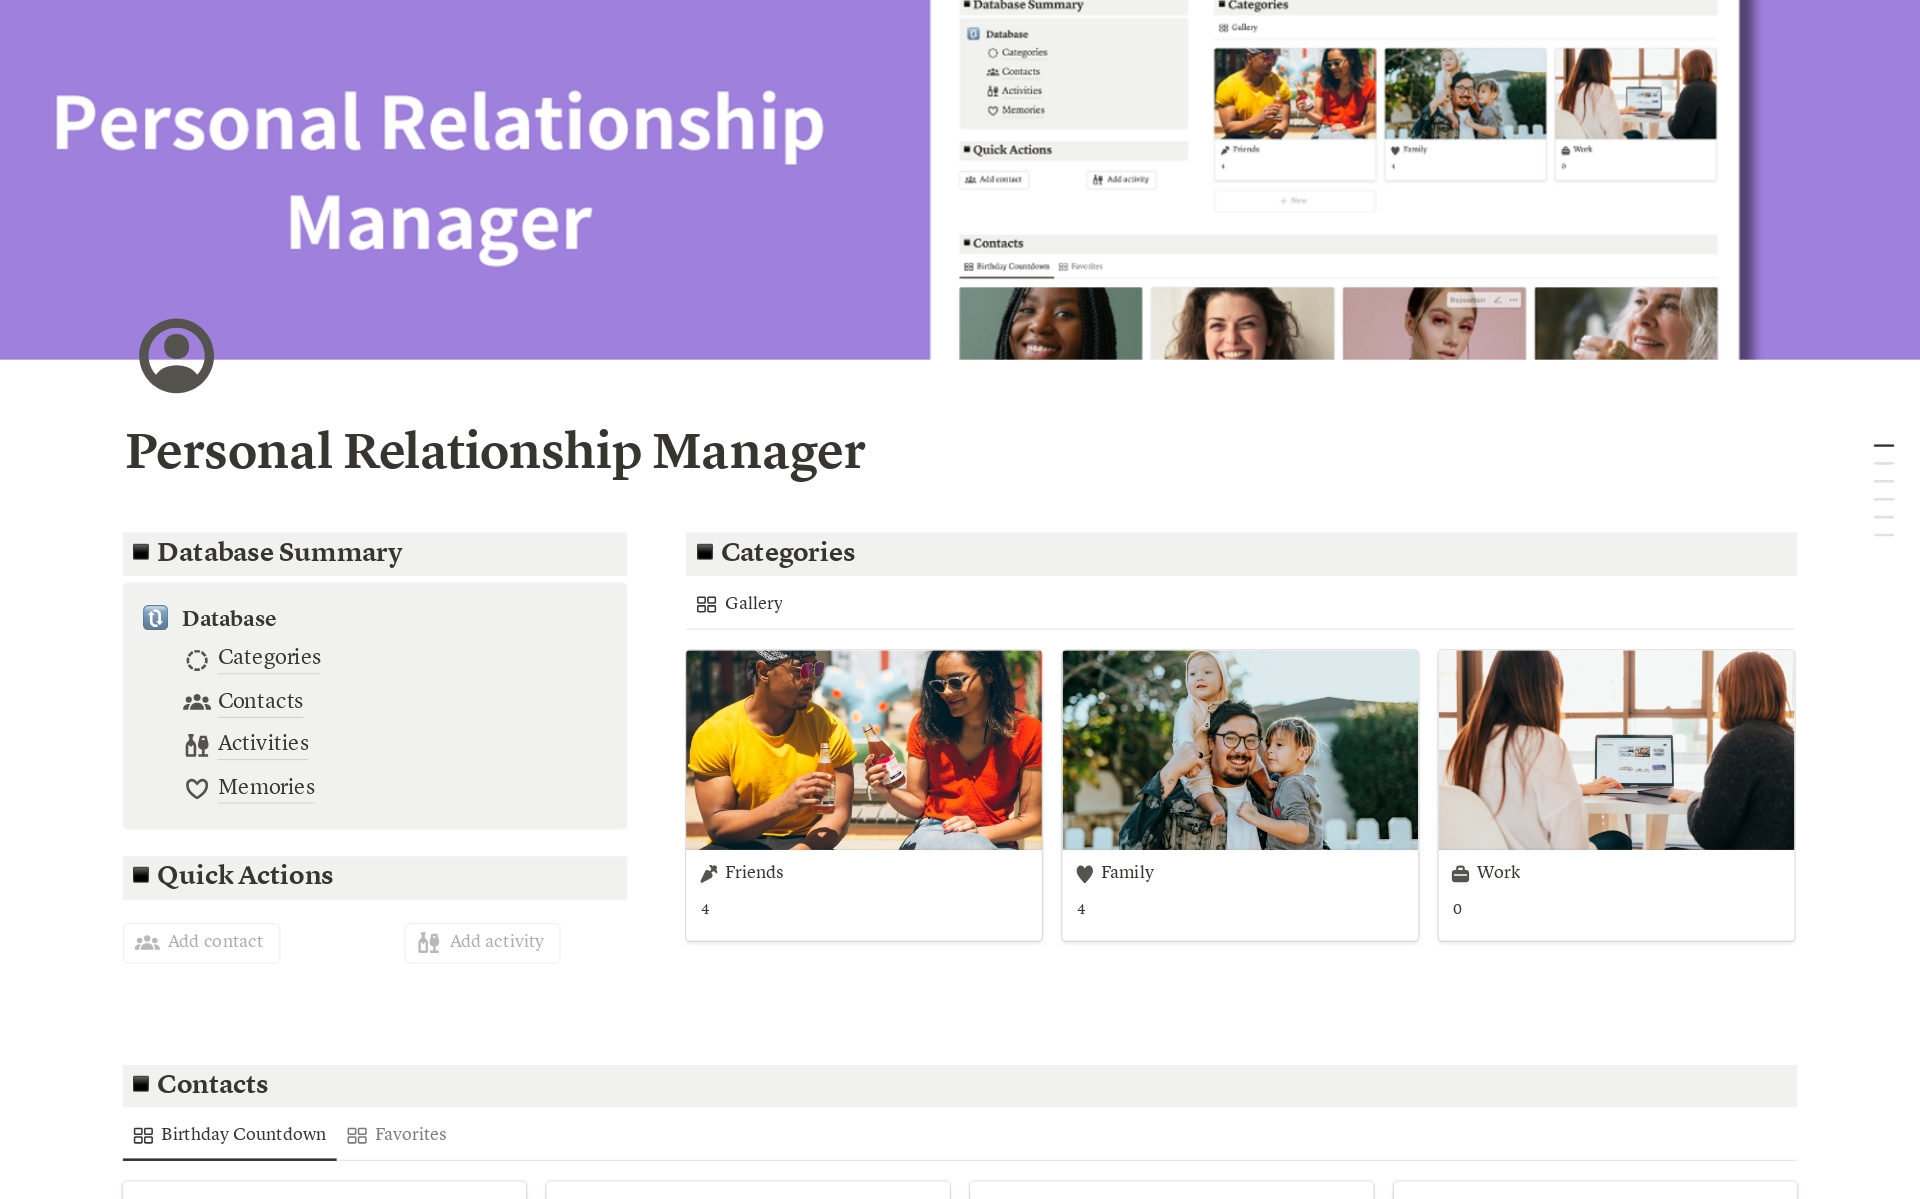 This Personal Relationship Manager template allows you to categorize and manage your contacts, and helps you keep track of everyone’s birthdays. Additionally, you can plan activities with your contacts and record meaningful memories afterward.